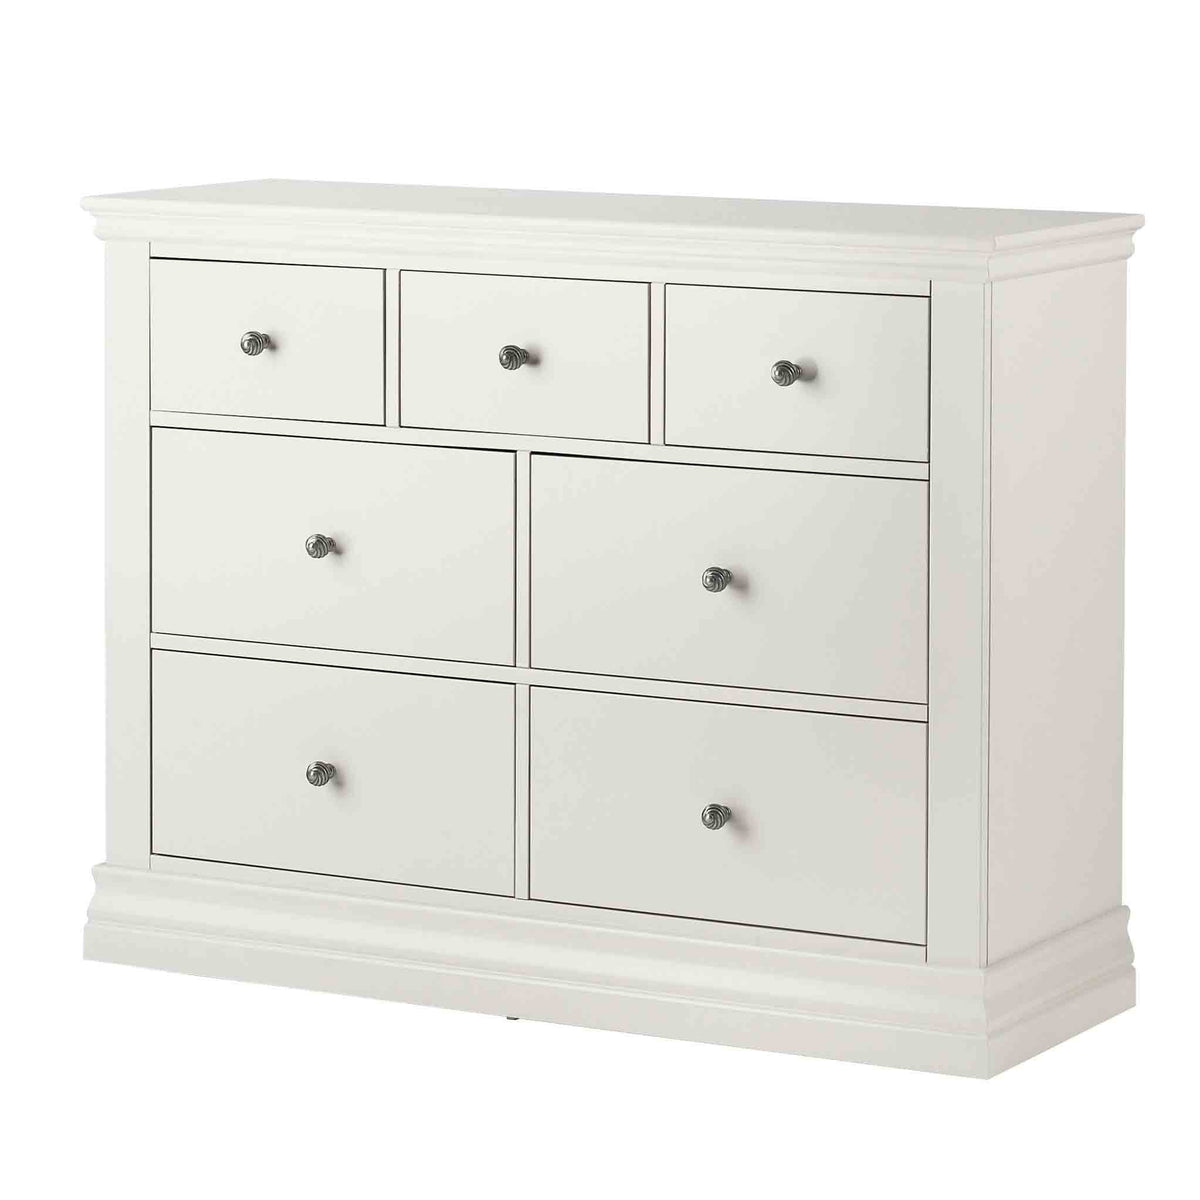 Melrose White 7 Drawer Chest of Drawers from Roseland Furniture